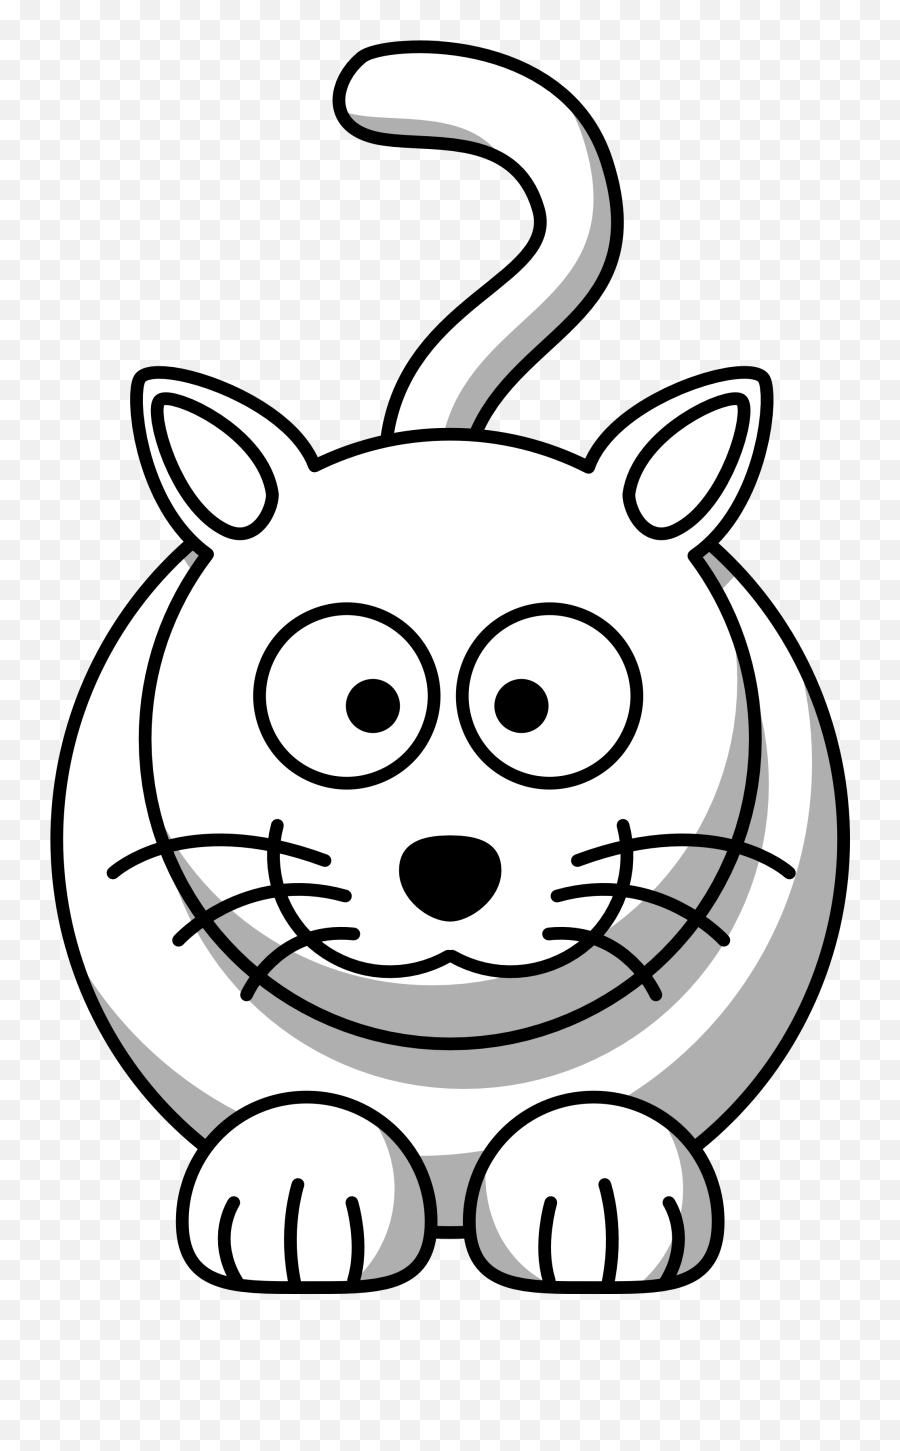 Library Of Cute Turkey And Animal Friends Vector Royalty - Cat Cartoon Drawing Clip Art Free Emoji,Turkey Clipart Black And White